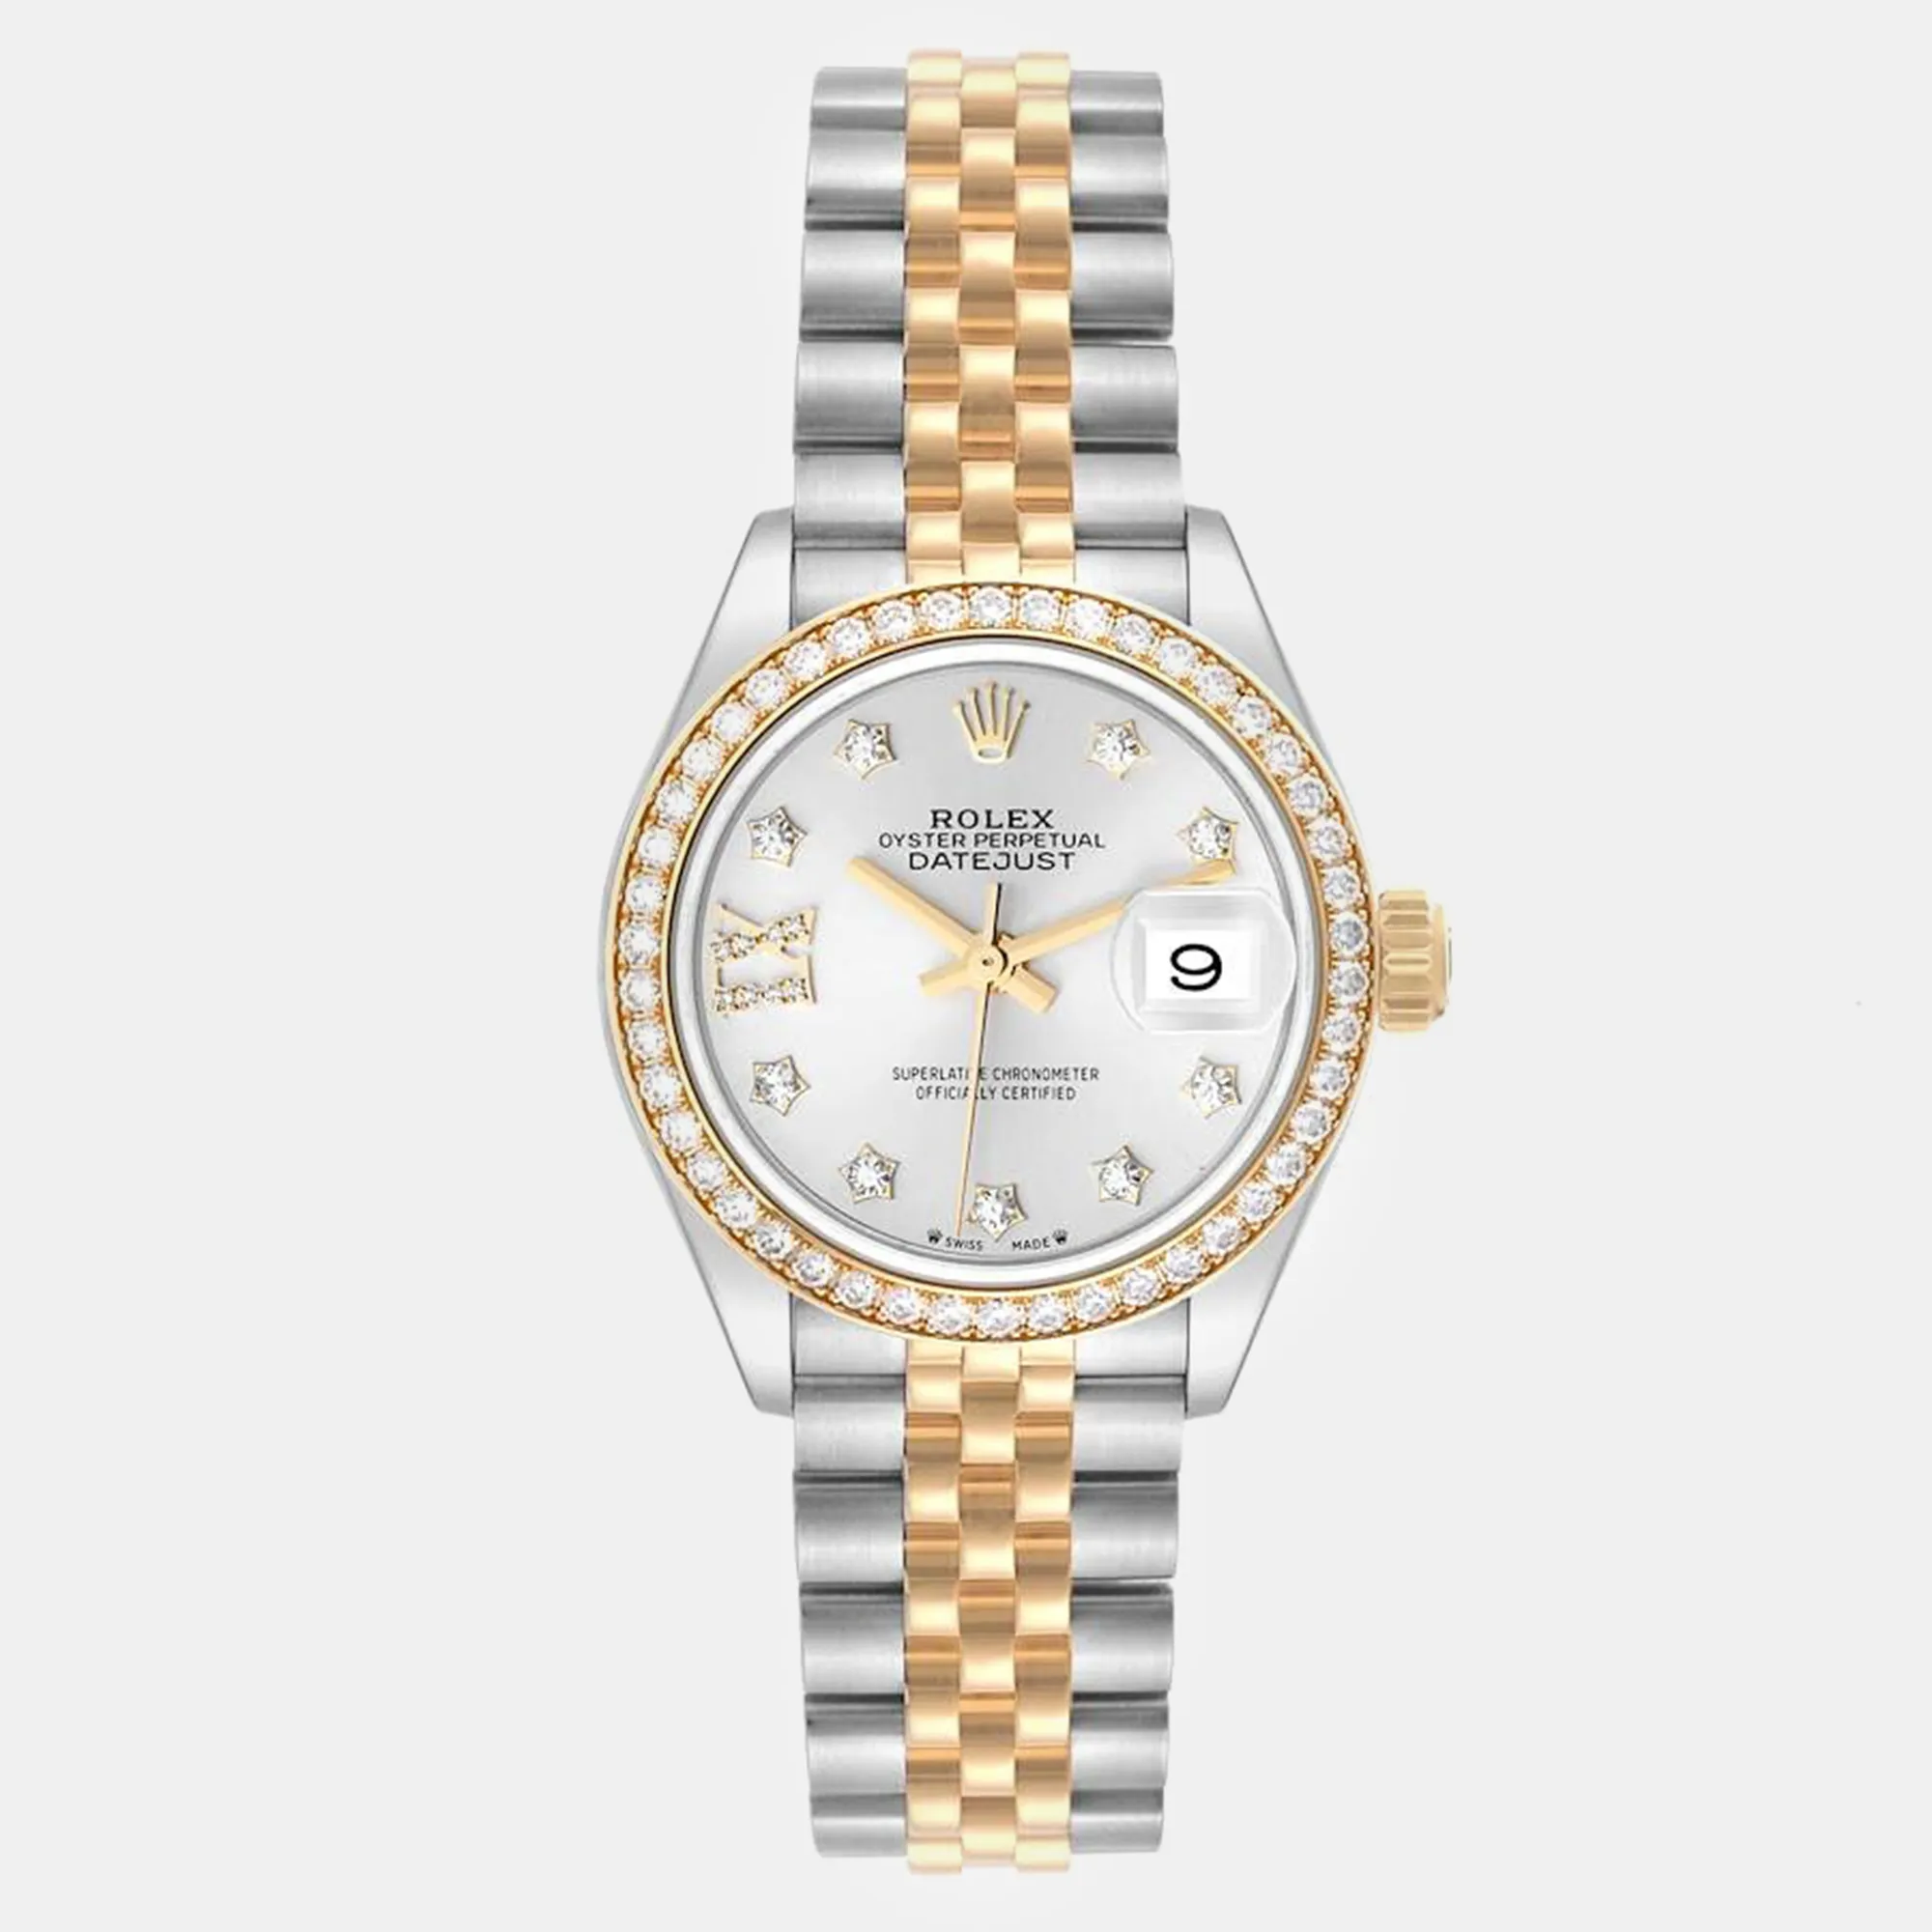 Rolex Datejust 28mm Yellow gold and stainless steel